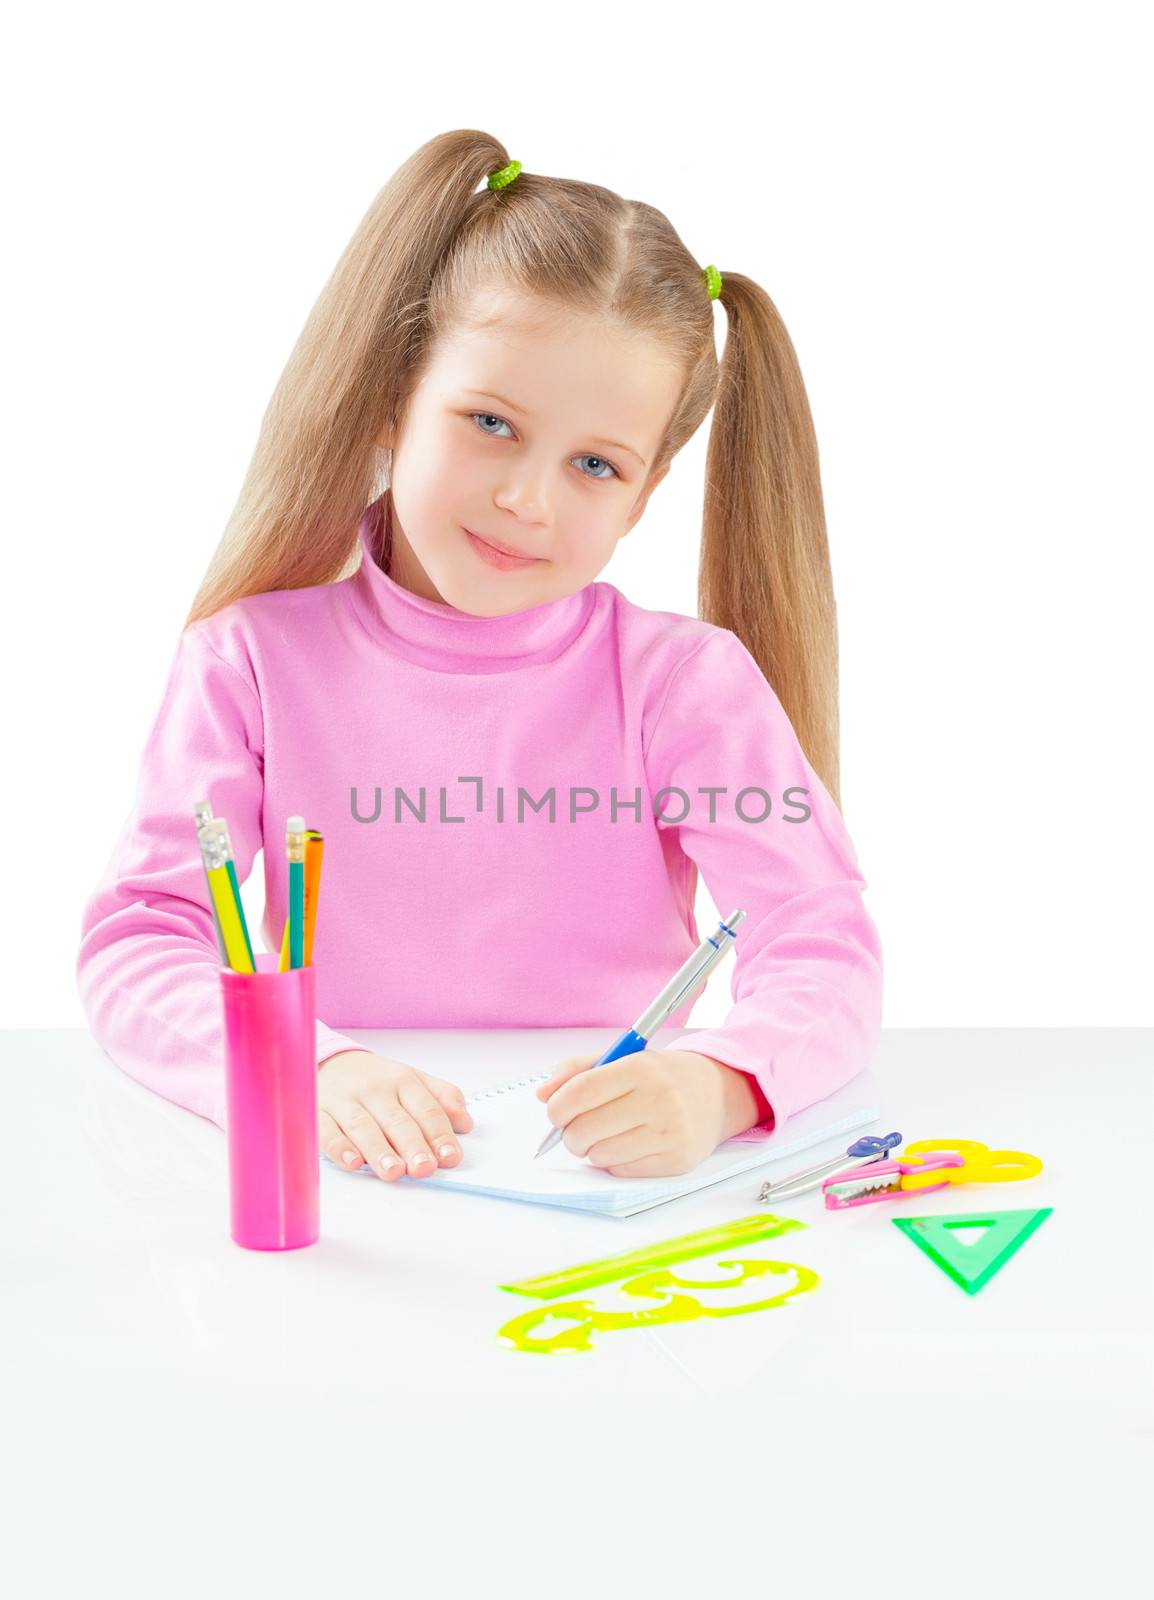 litli girl sitting at table and writing with ballpoint pen isola by mihalec